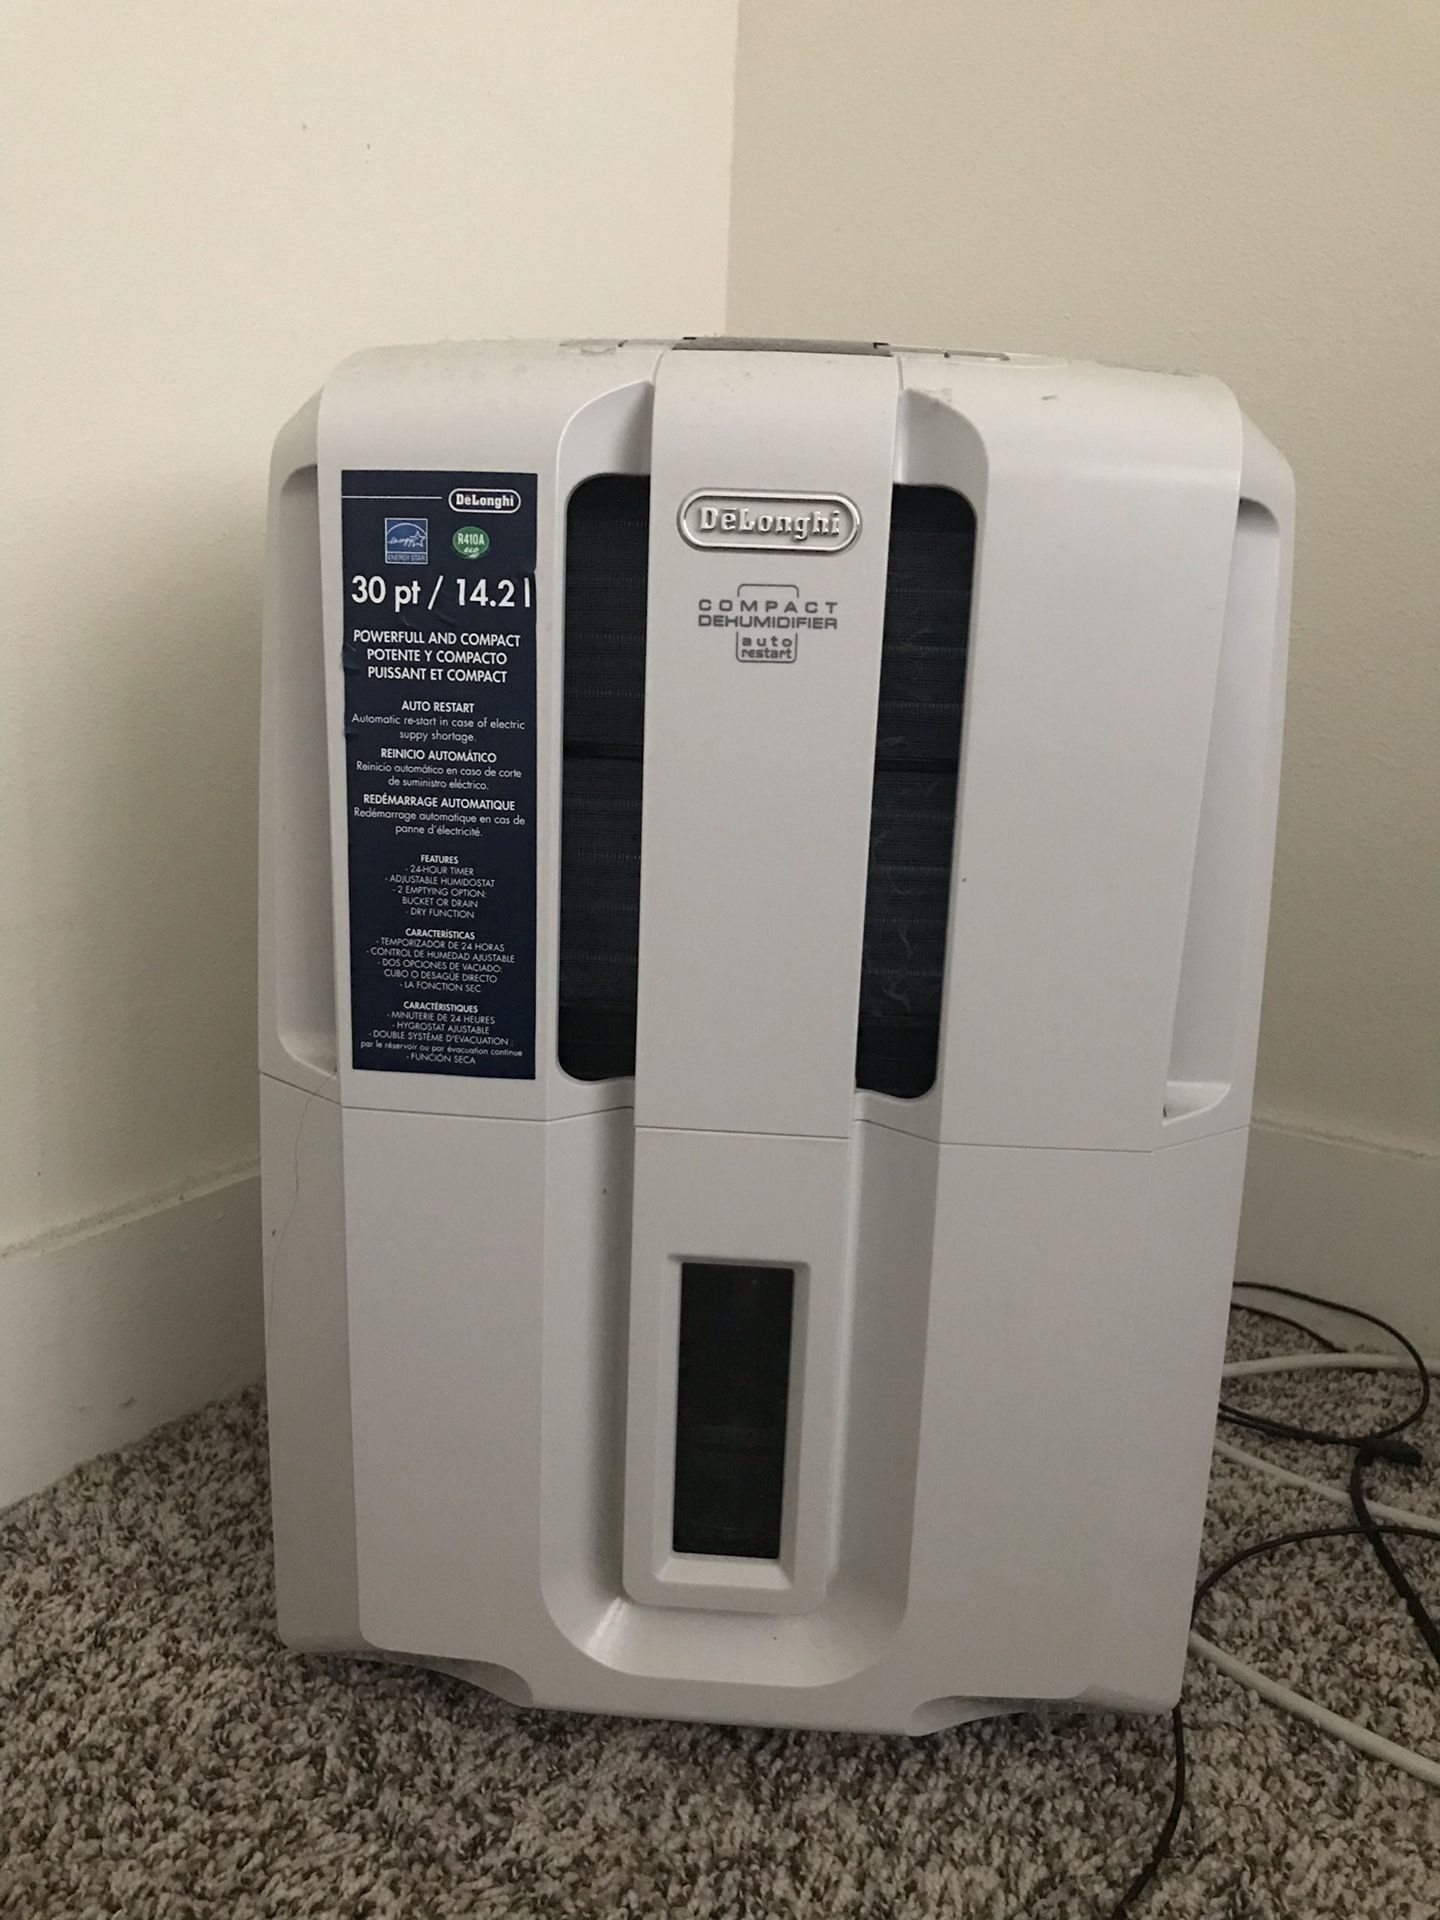 Dehumidifier for less. Powerful and quiet